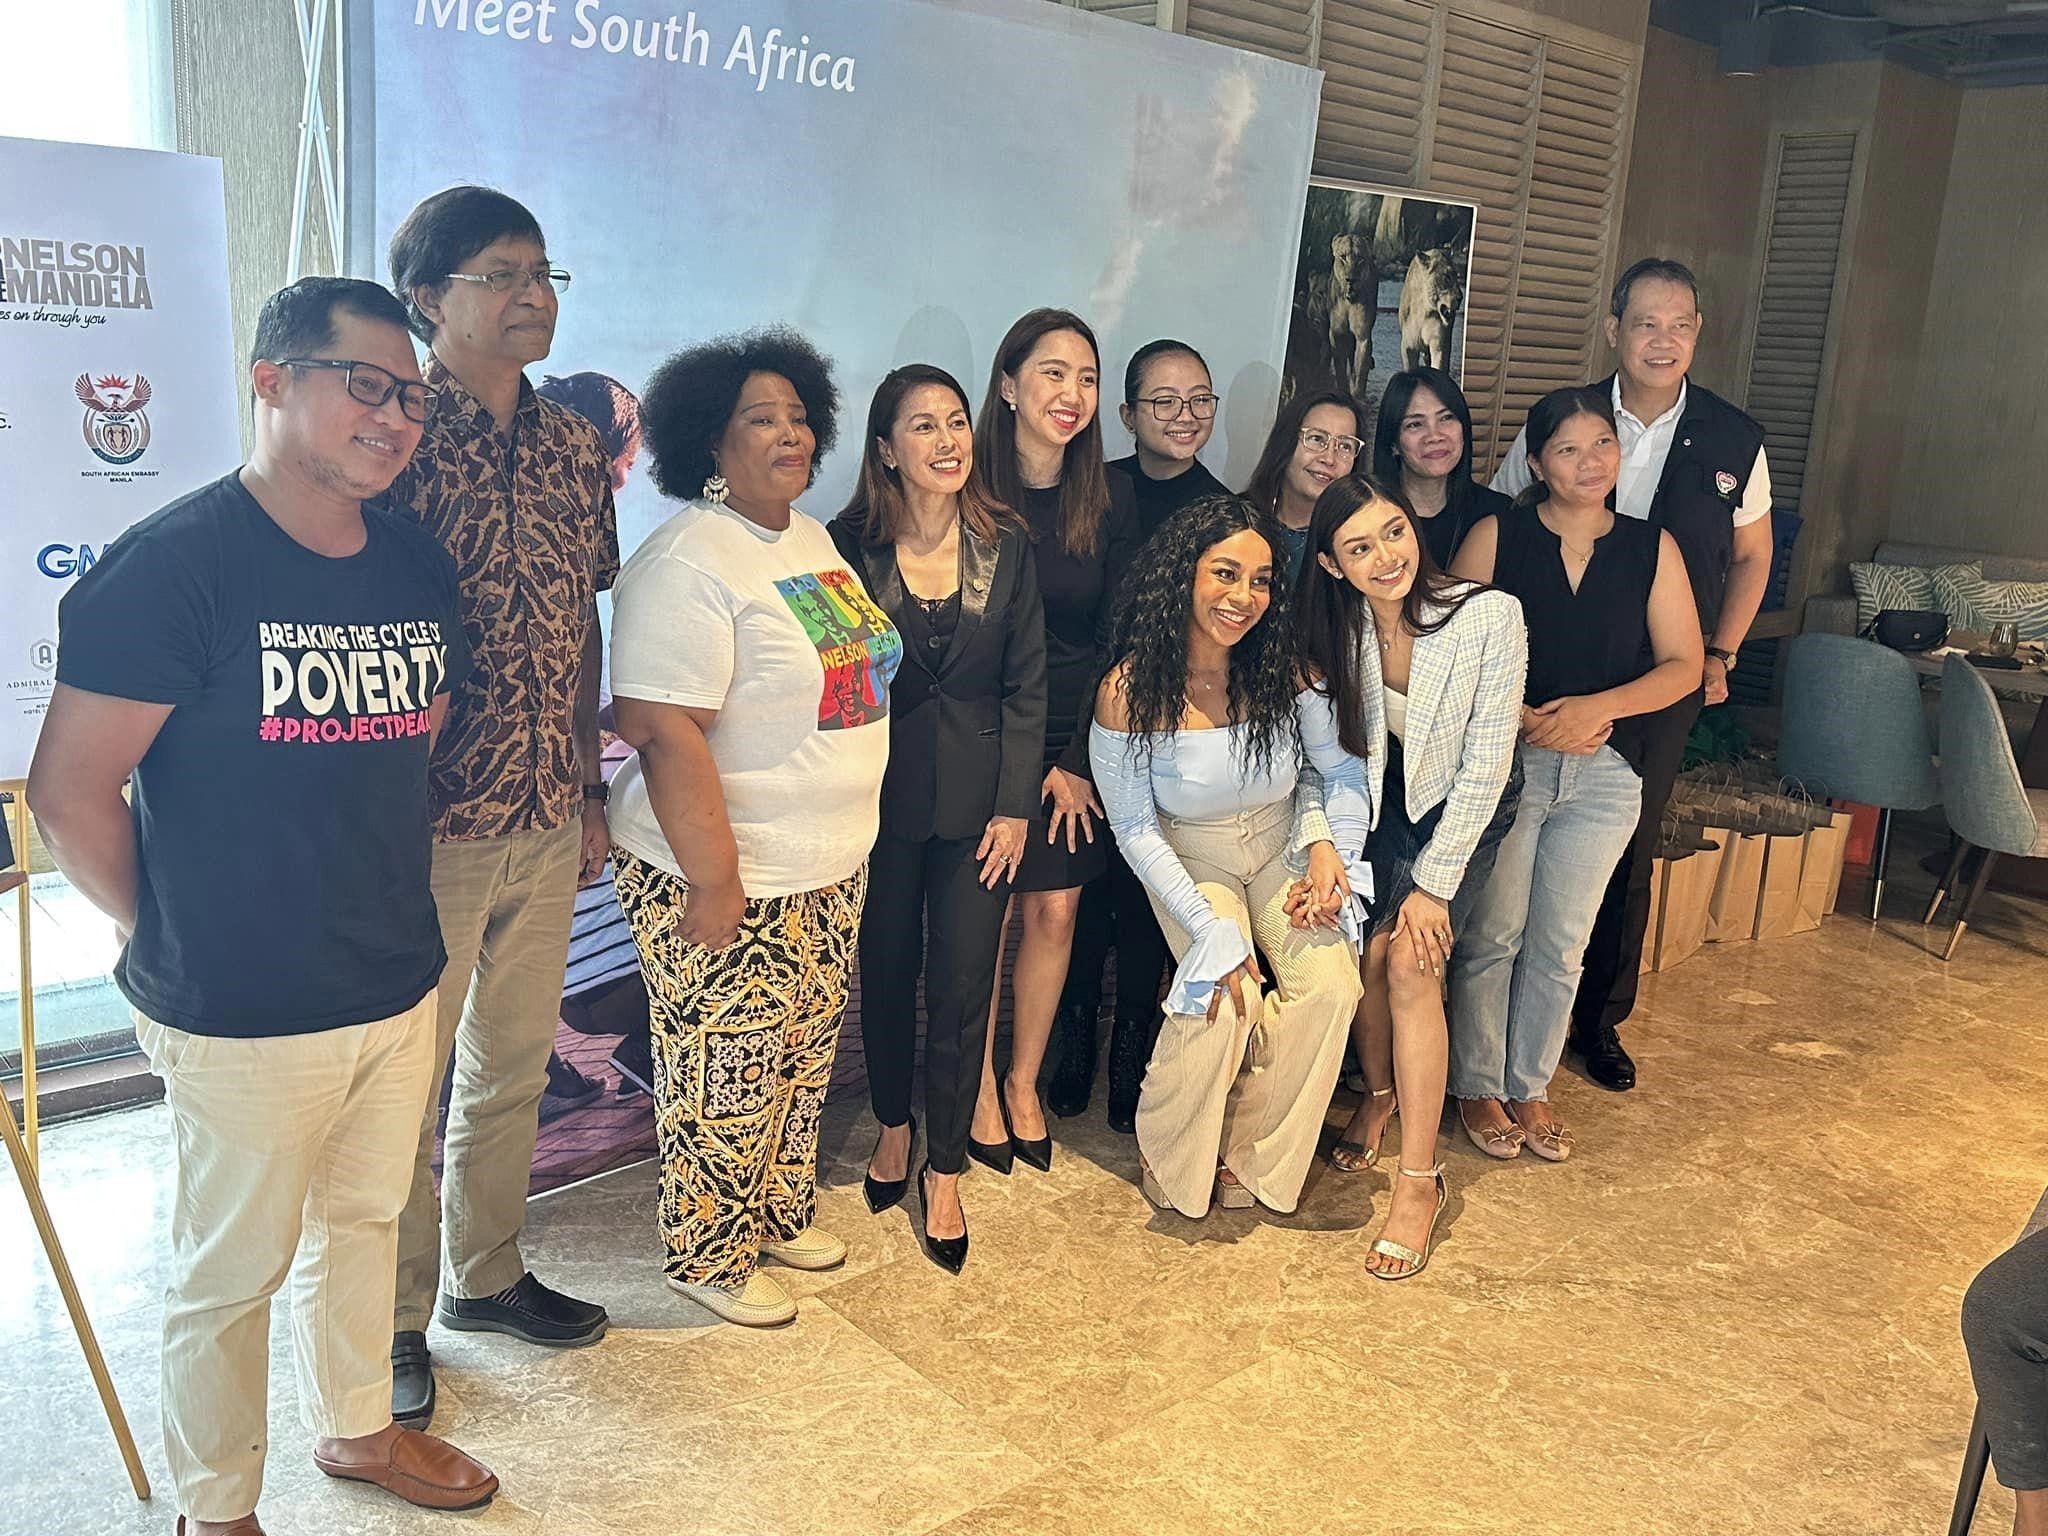 KACH, TWOMONKEYSTRAVEL CELEBRATES THE 2023 NELSON MANDELA DAY WITH THE SOUTH AFRICAN EMBASSY, MANILA LAST EIGHTEENTH OF JULY